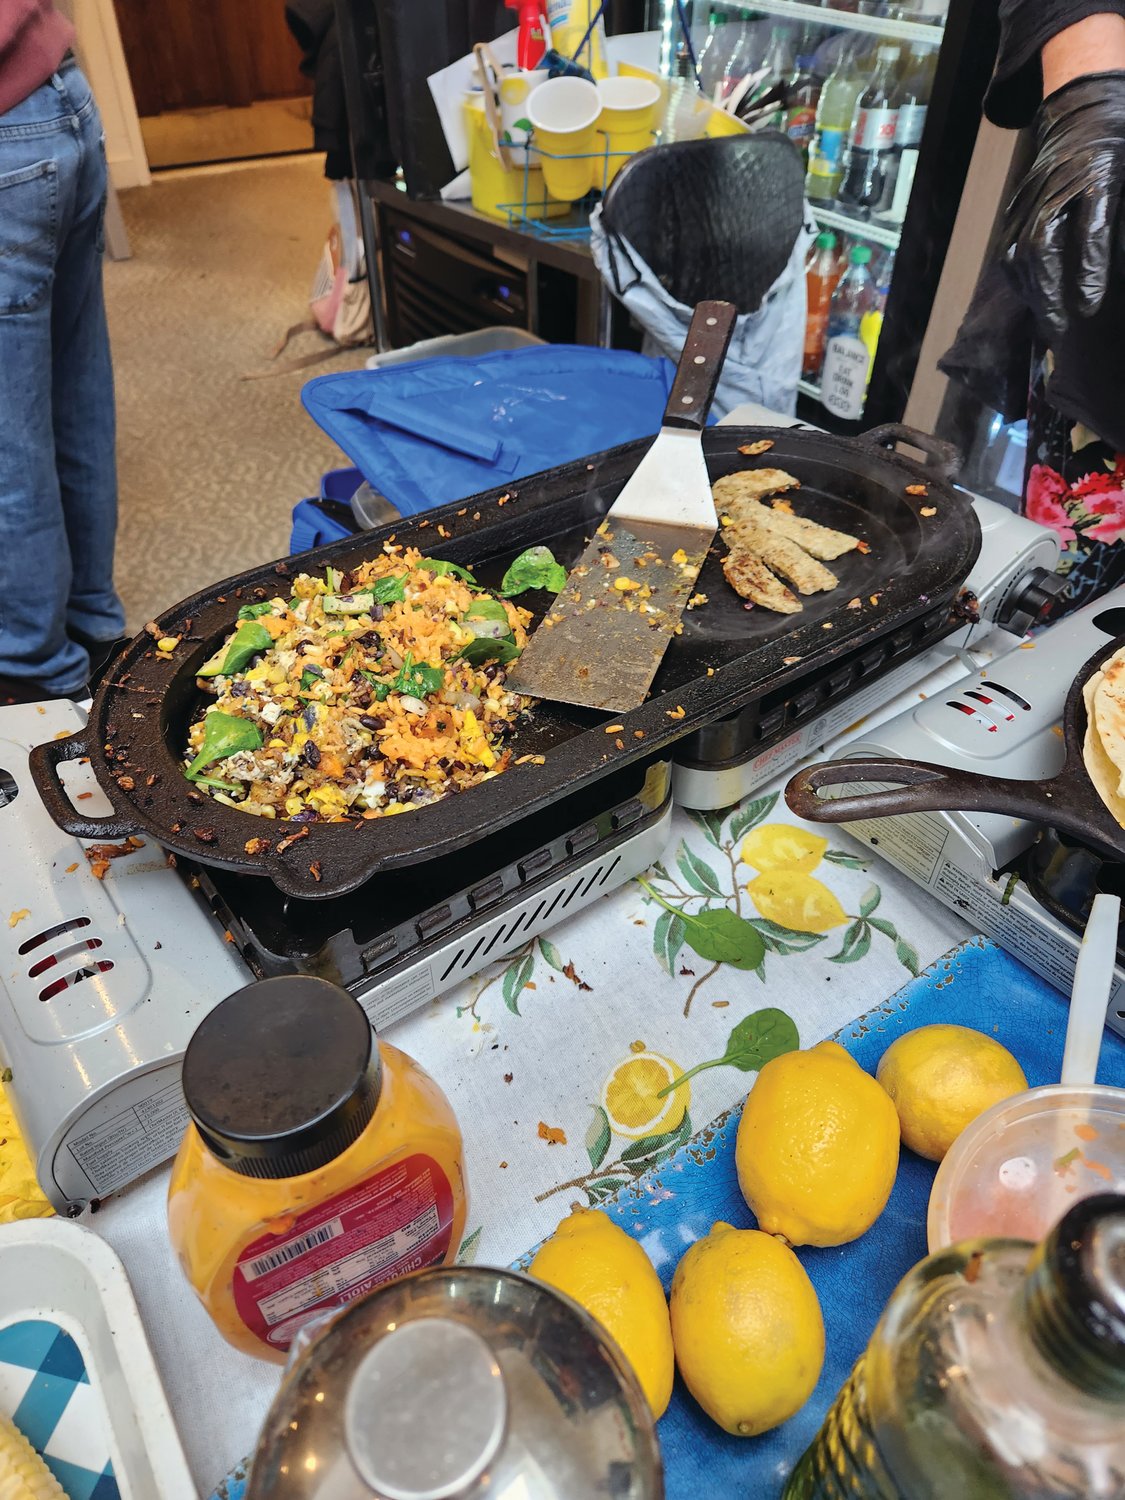 Breakfast burritos are made by Macungie Mountain Herb Farm, offering breakfast along with many regionally made and grown foods at the winter Wrightstown Farmers Market.